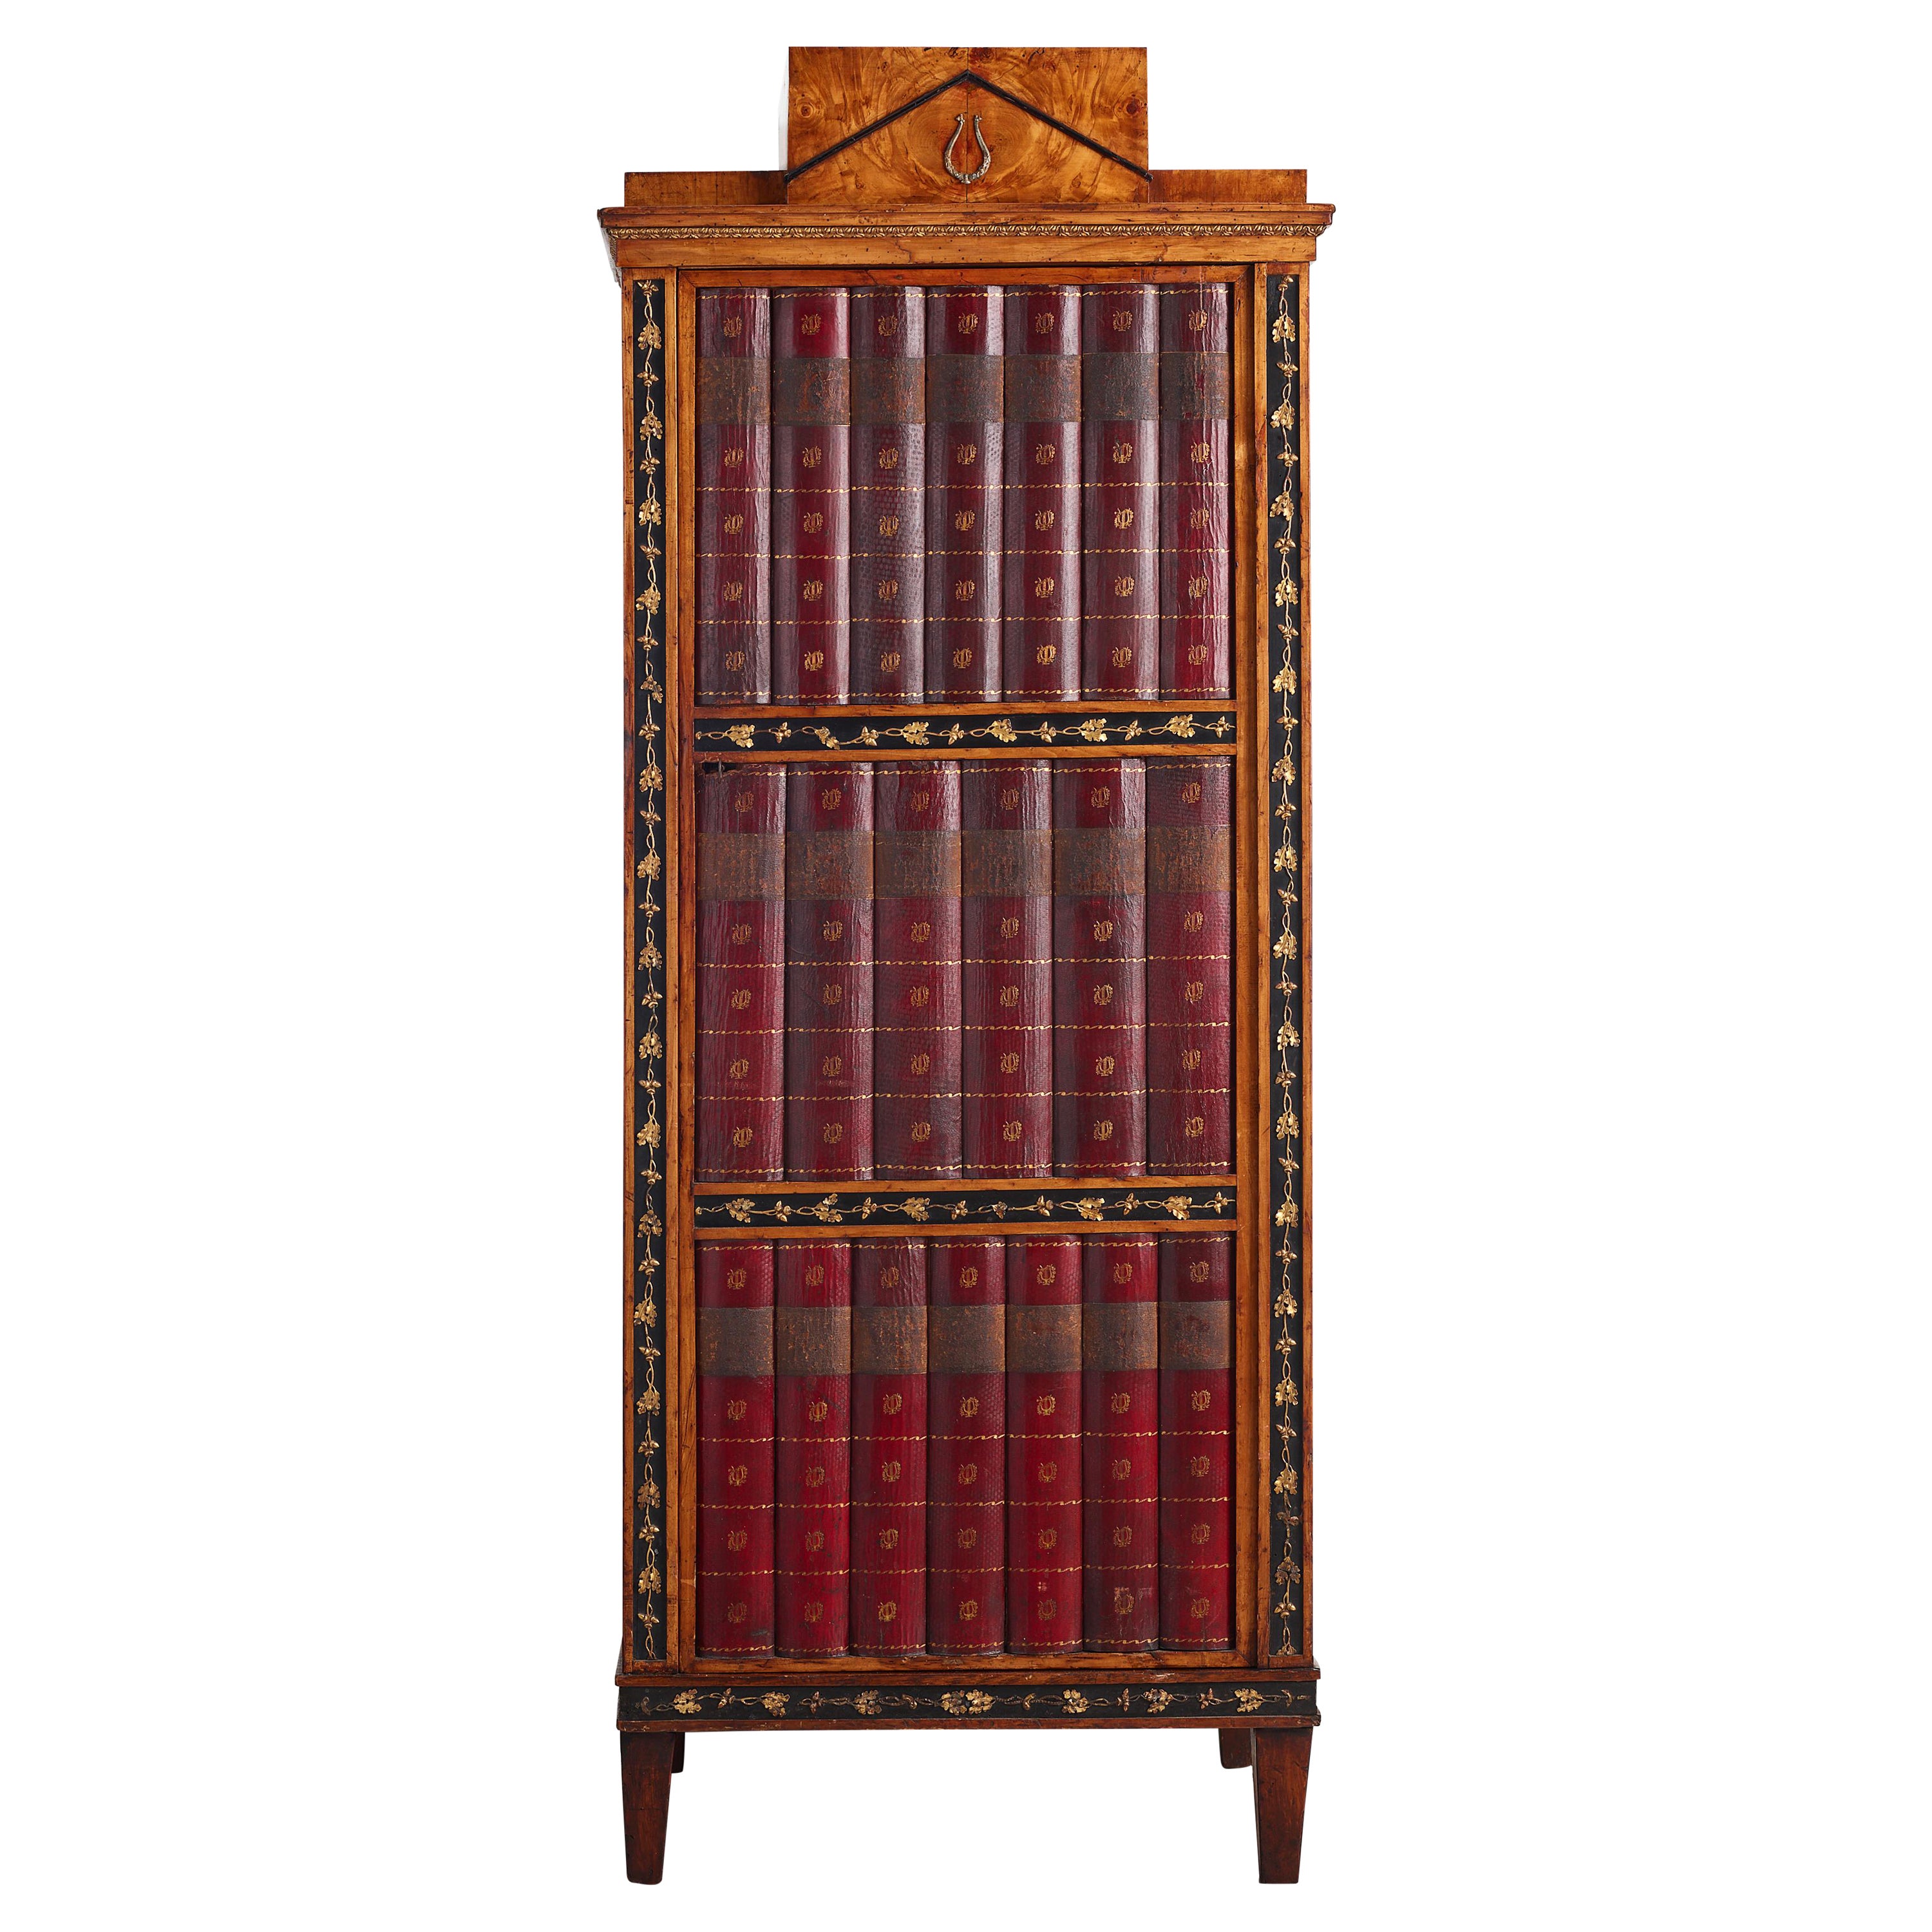 Unusual German Neoclassical Cabinet with Faux-Book Spine Decorated Door